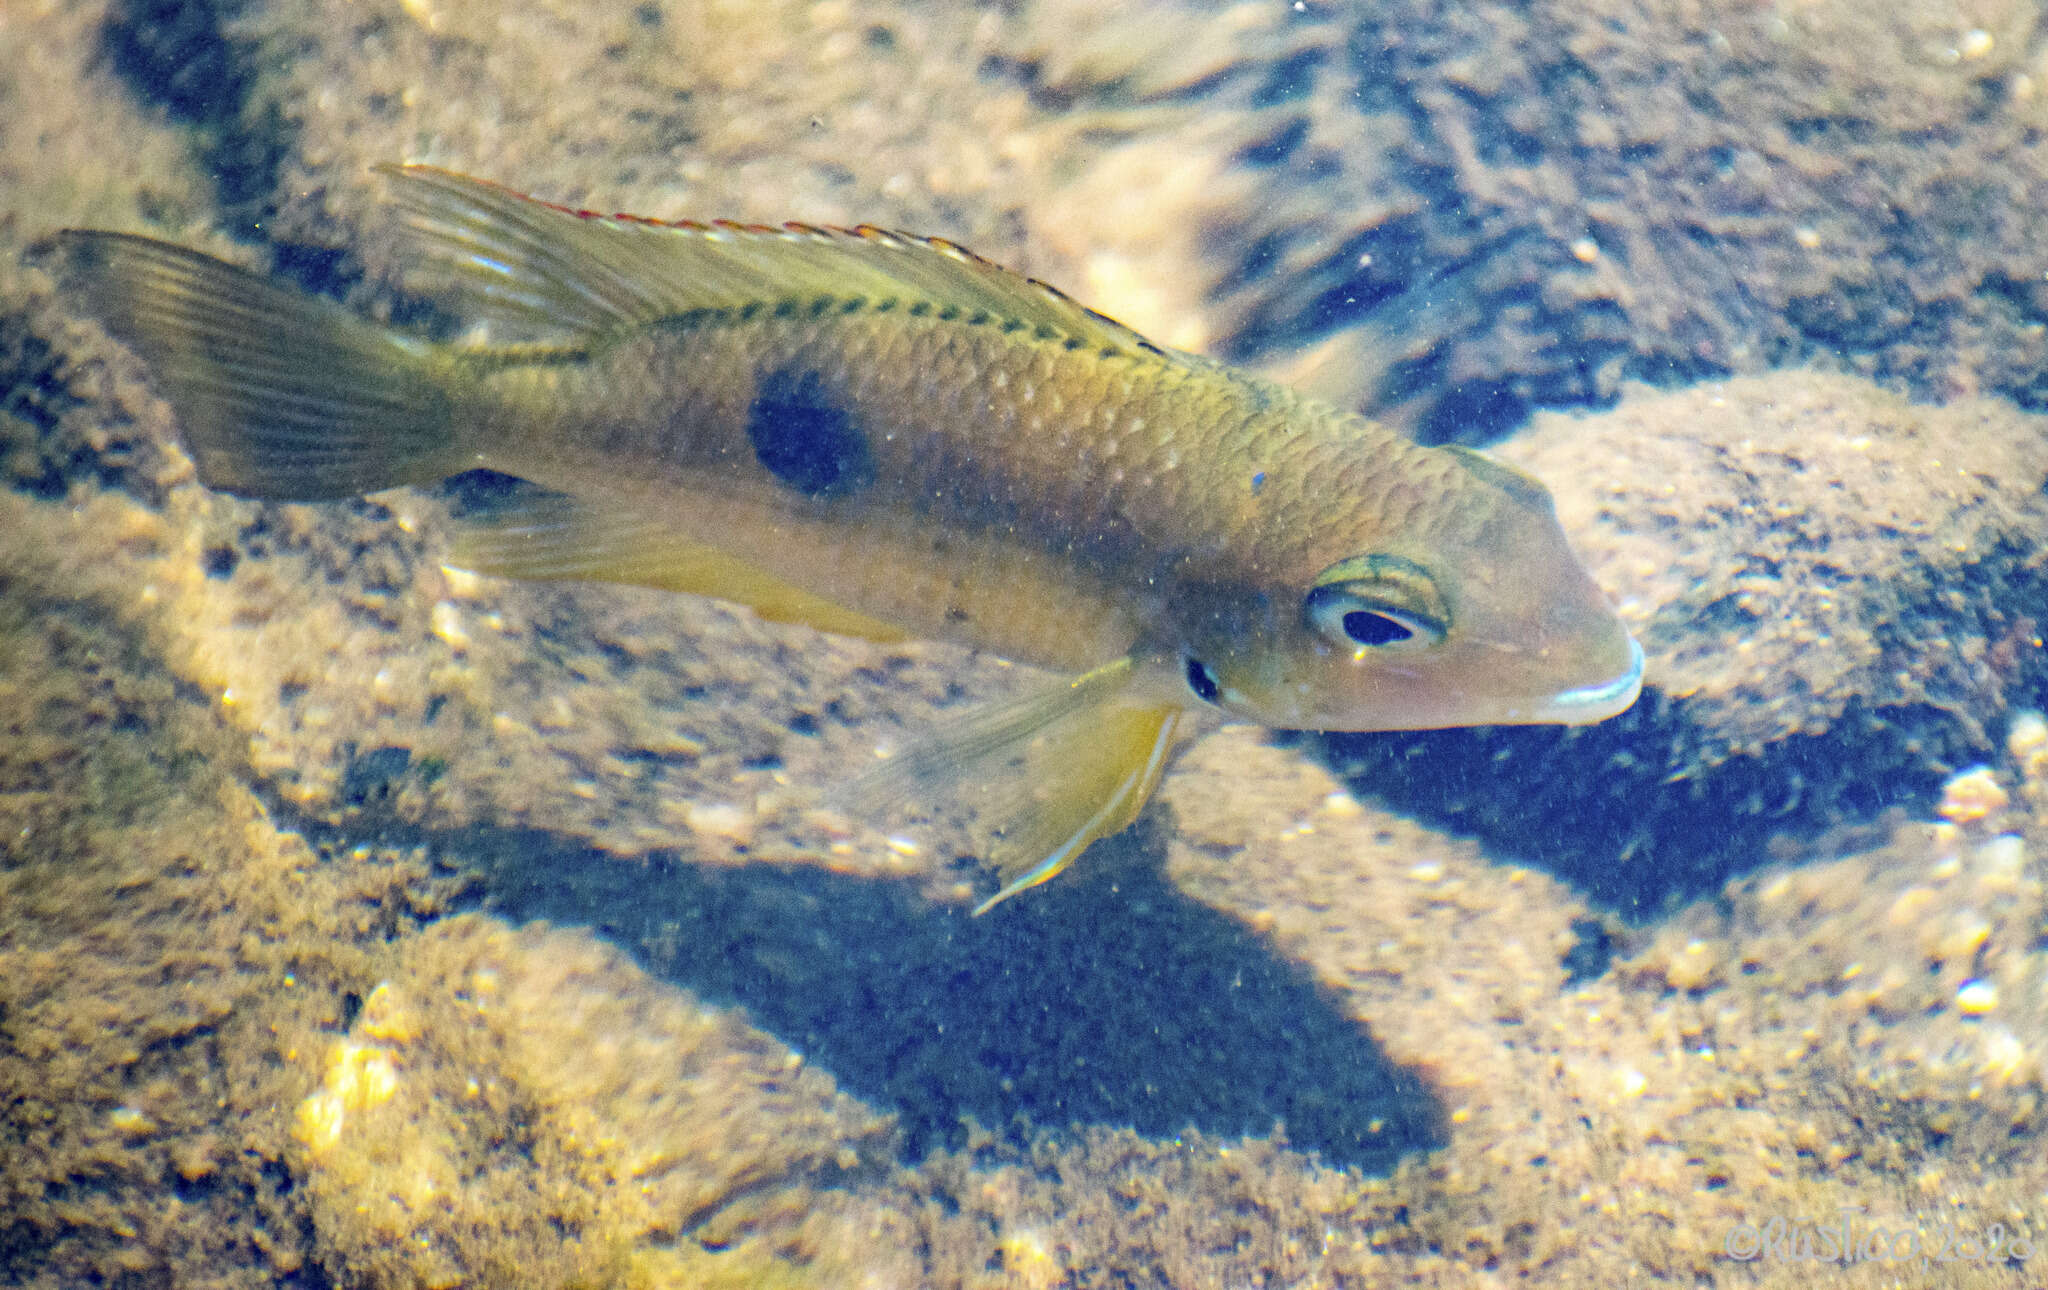 Image of Thorichthys panchovillai